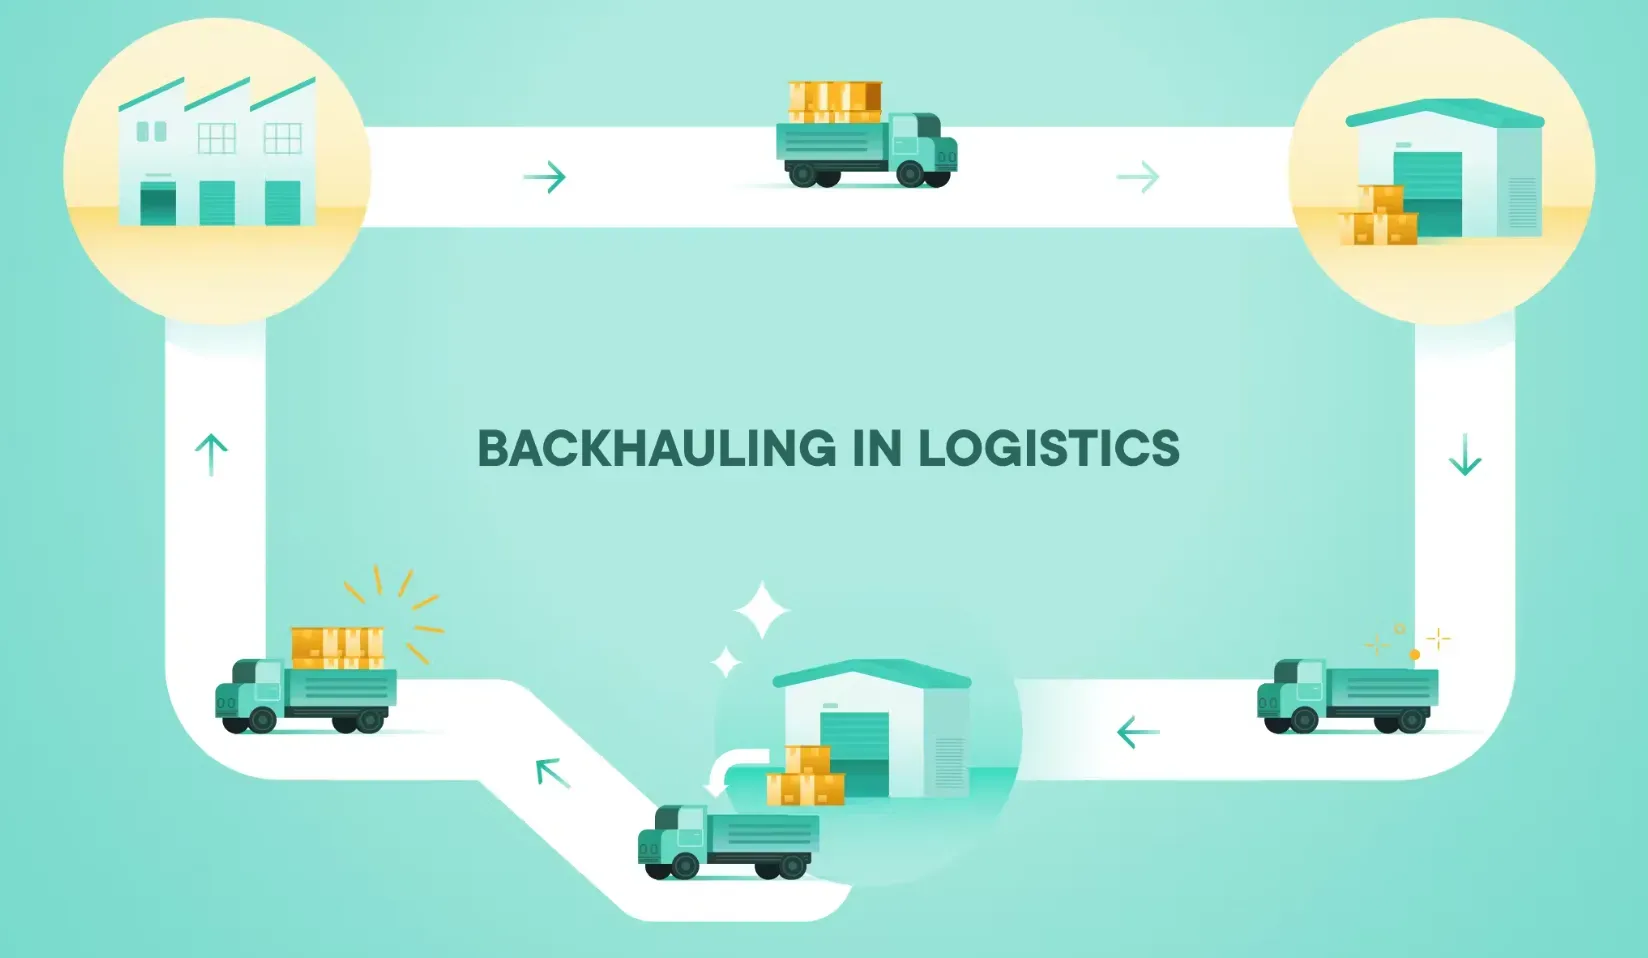 What does Backhaul mean in Logistics?